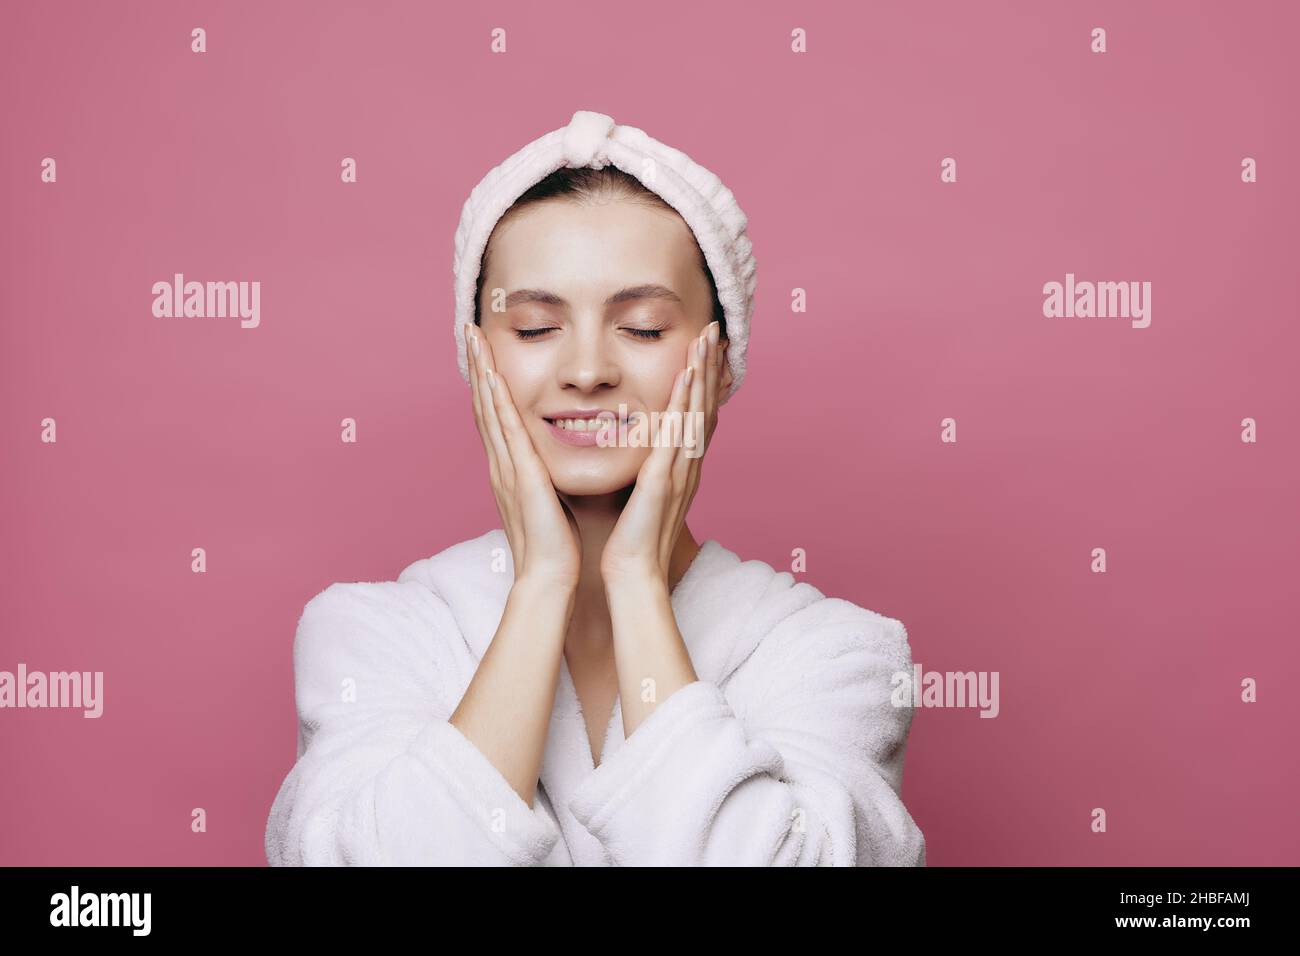 Smiling girl with headband cleansing her face Stock Photo